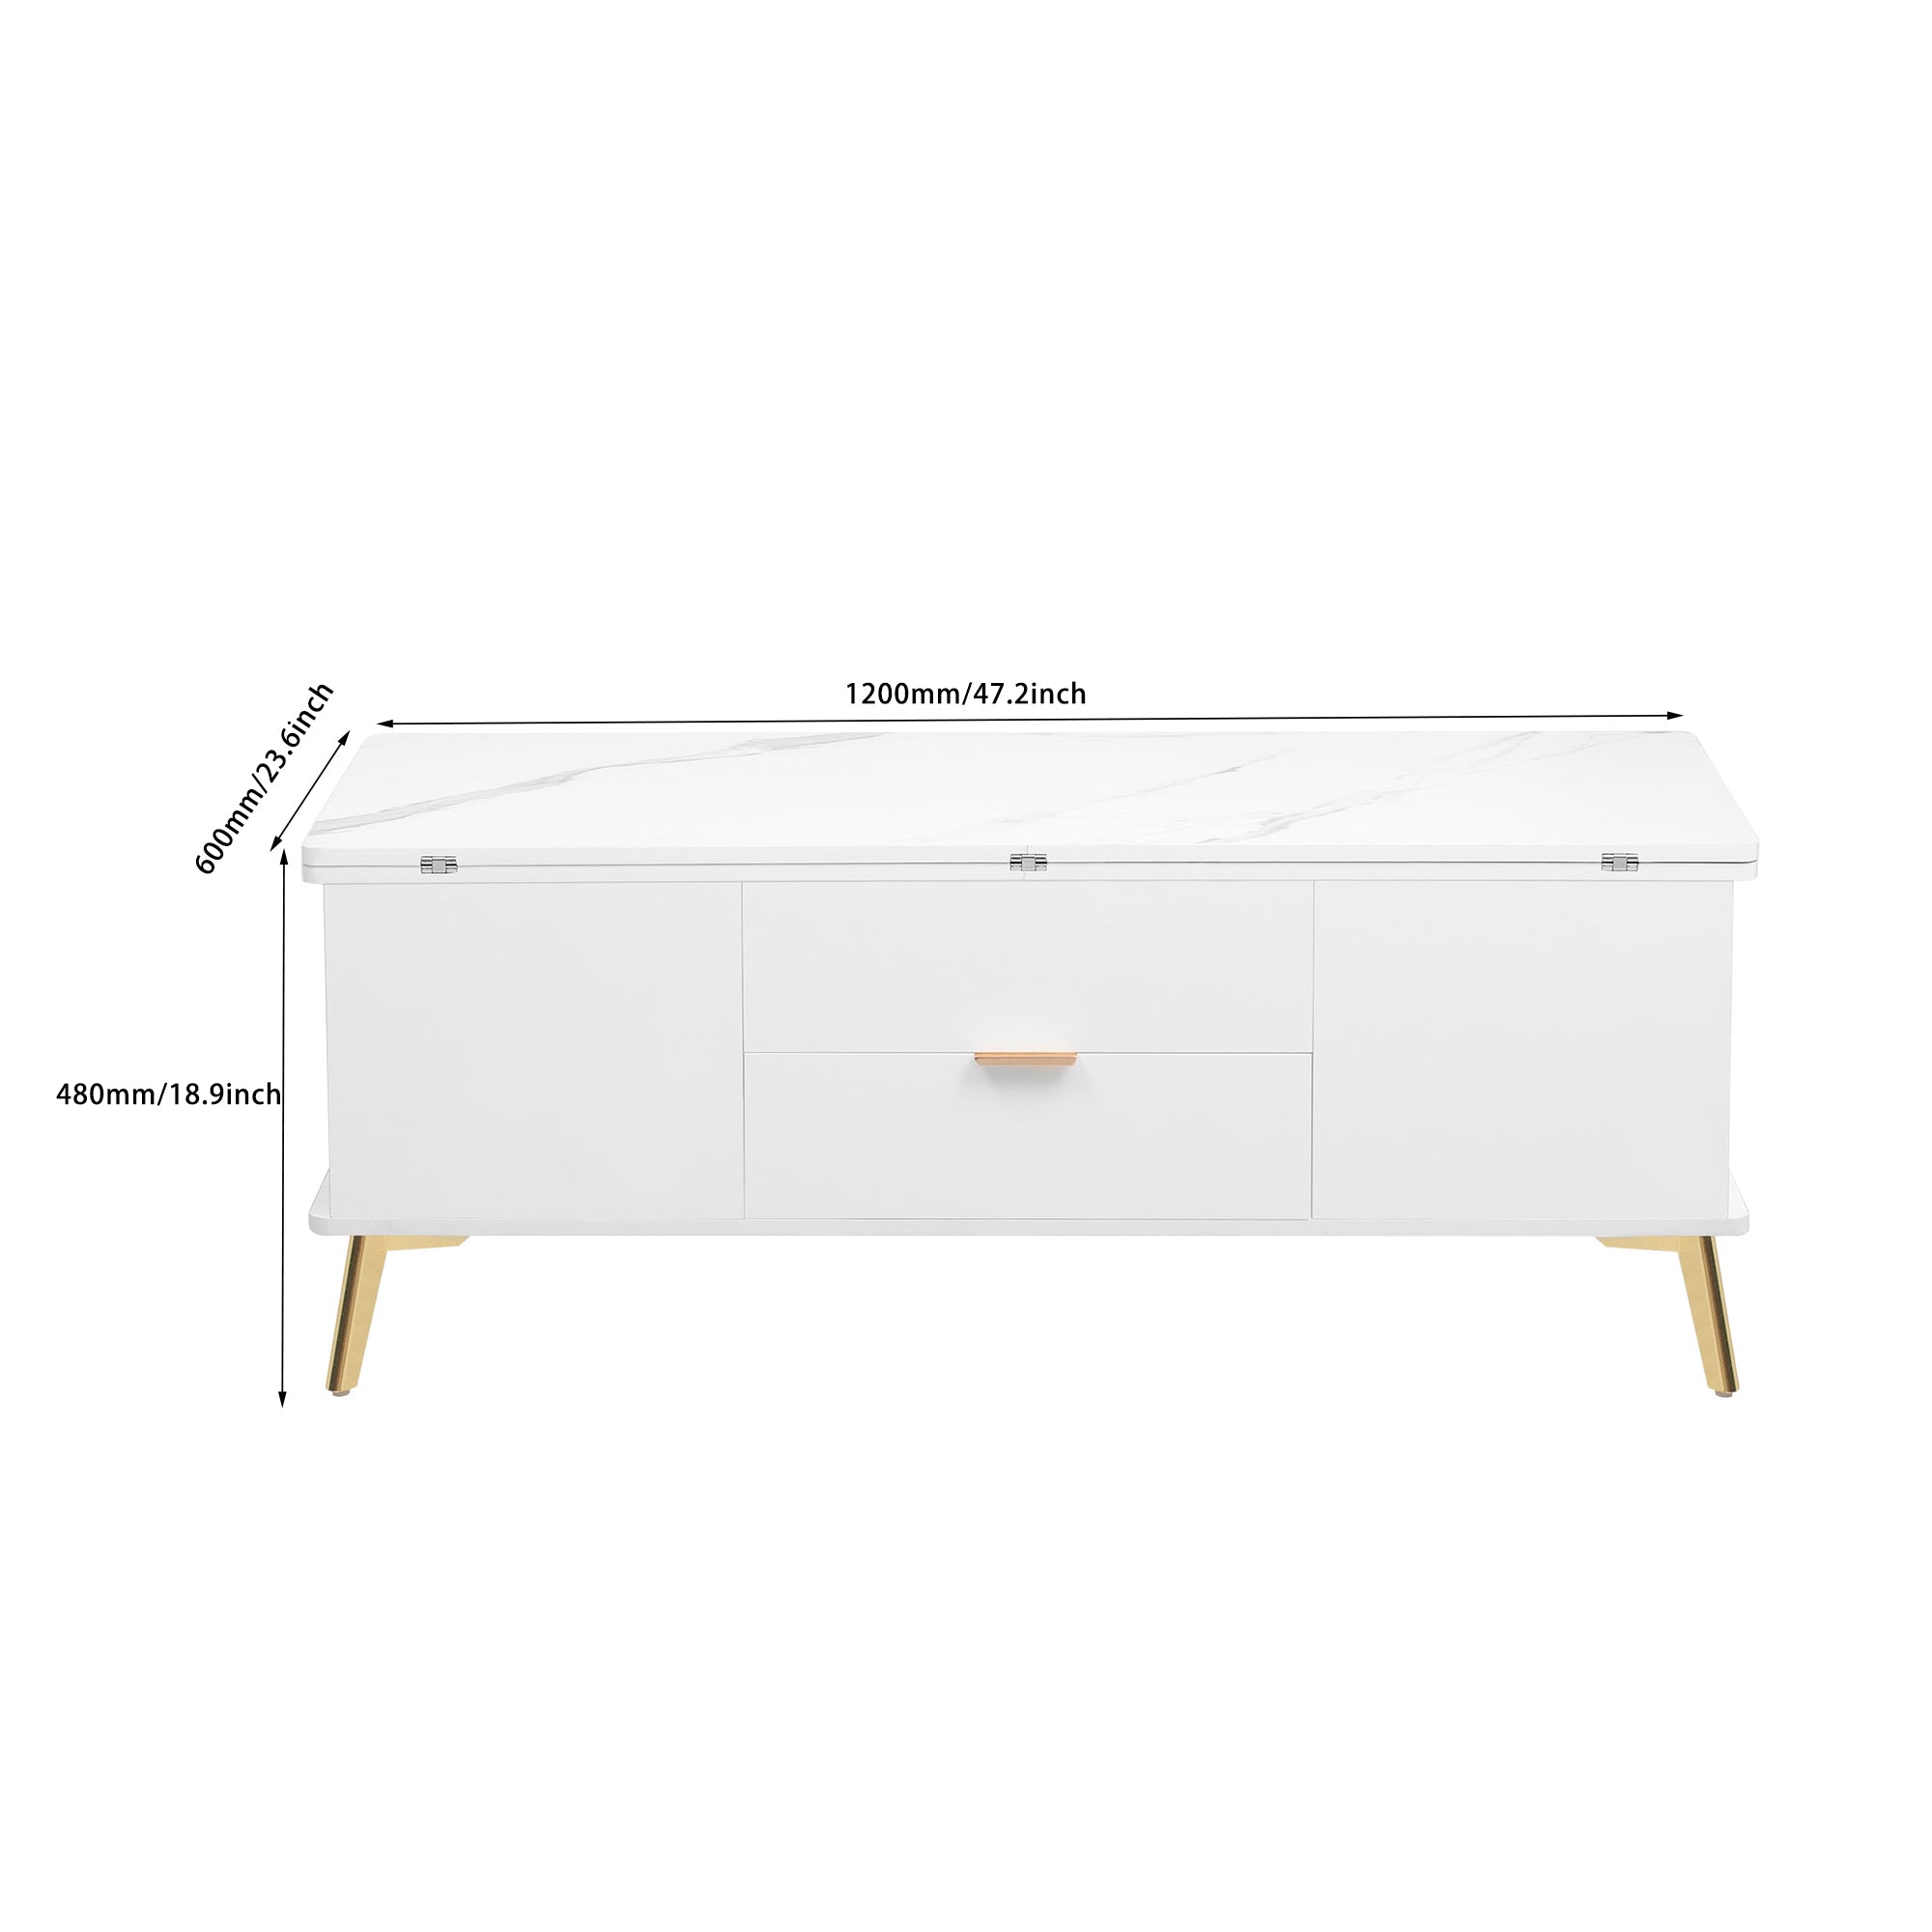 Modern Lift Top Coffee Table Multi Functional Table white-mdf+steel